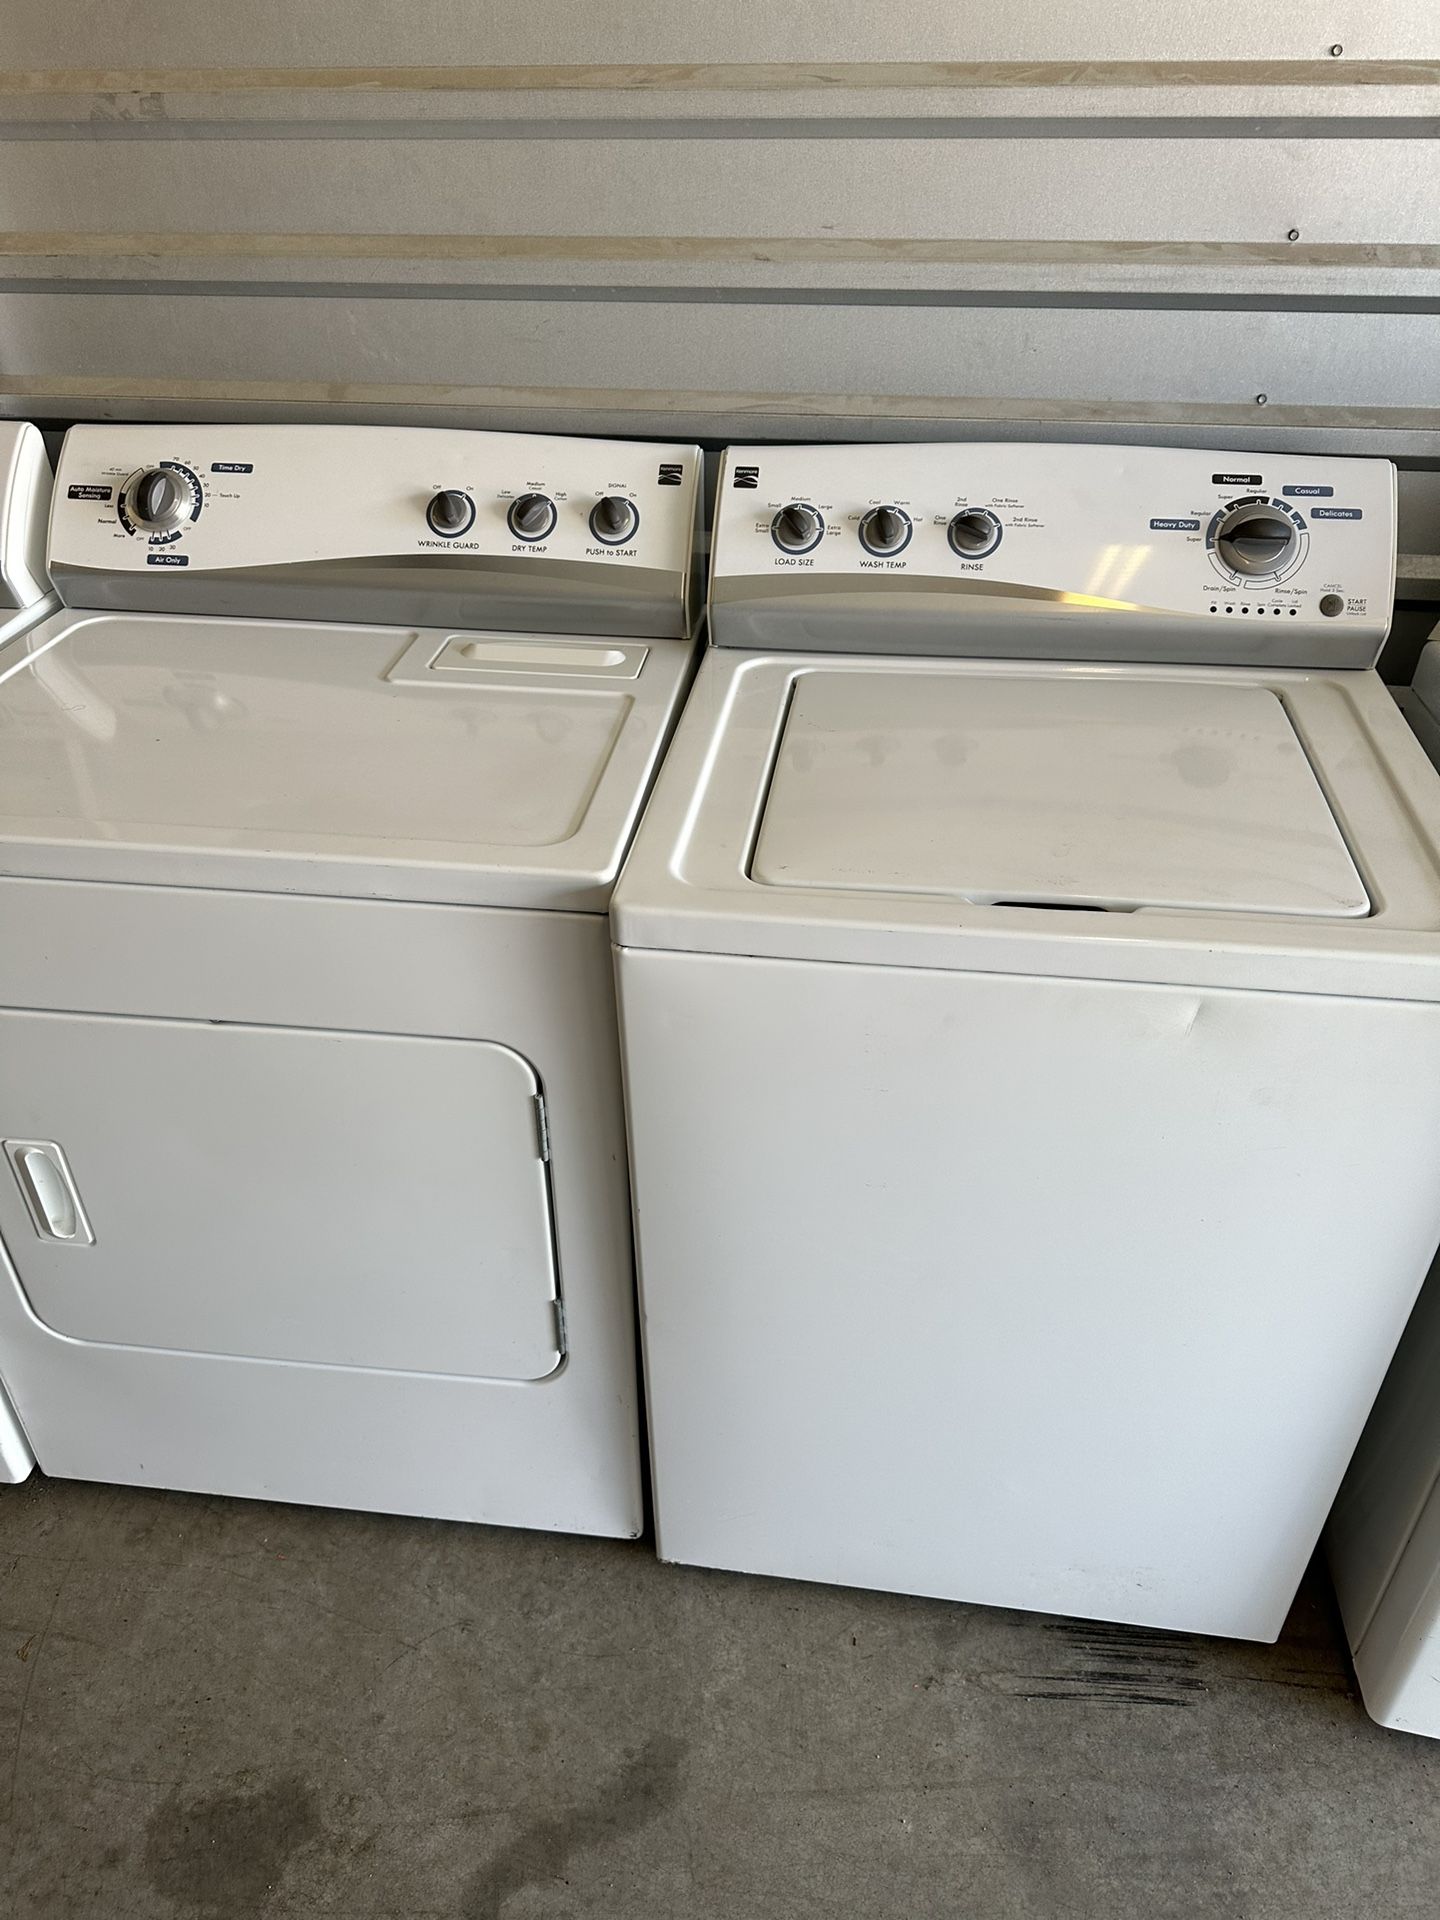 Kenmore top load washer and dryer beautiful